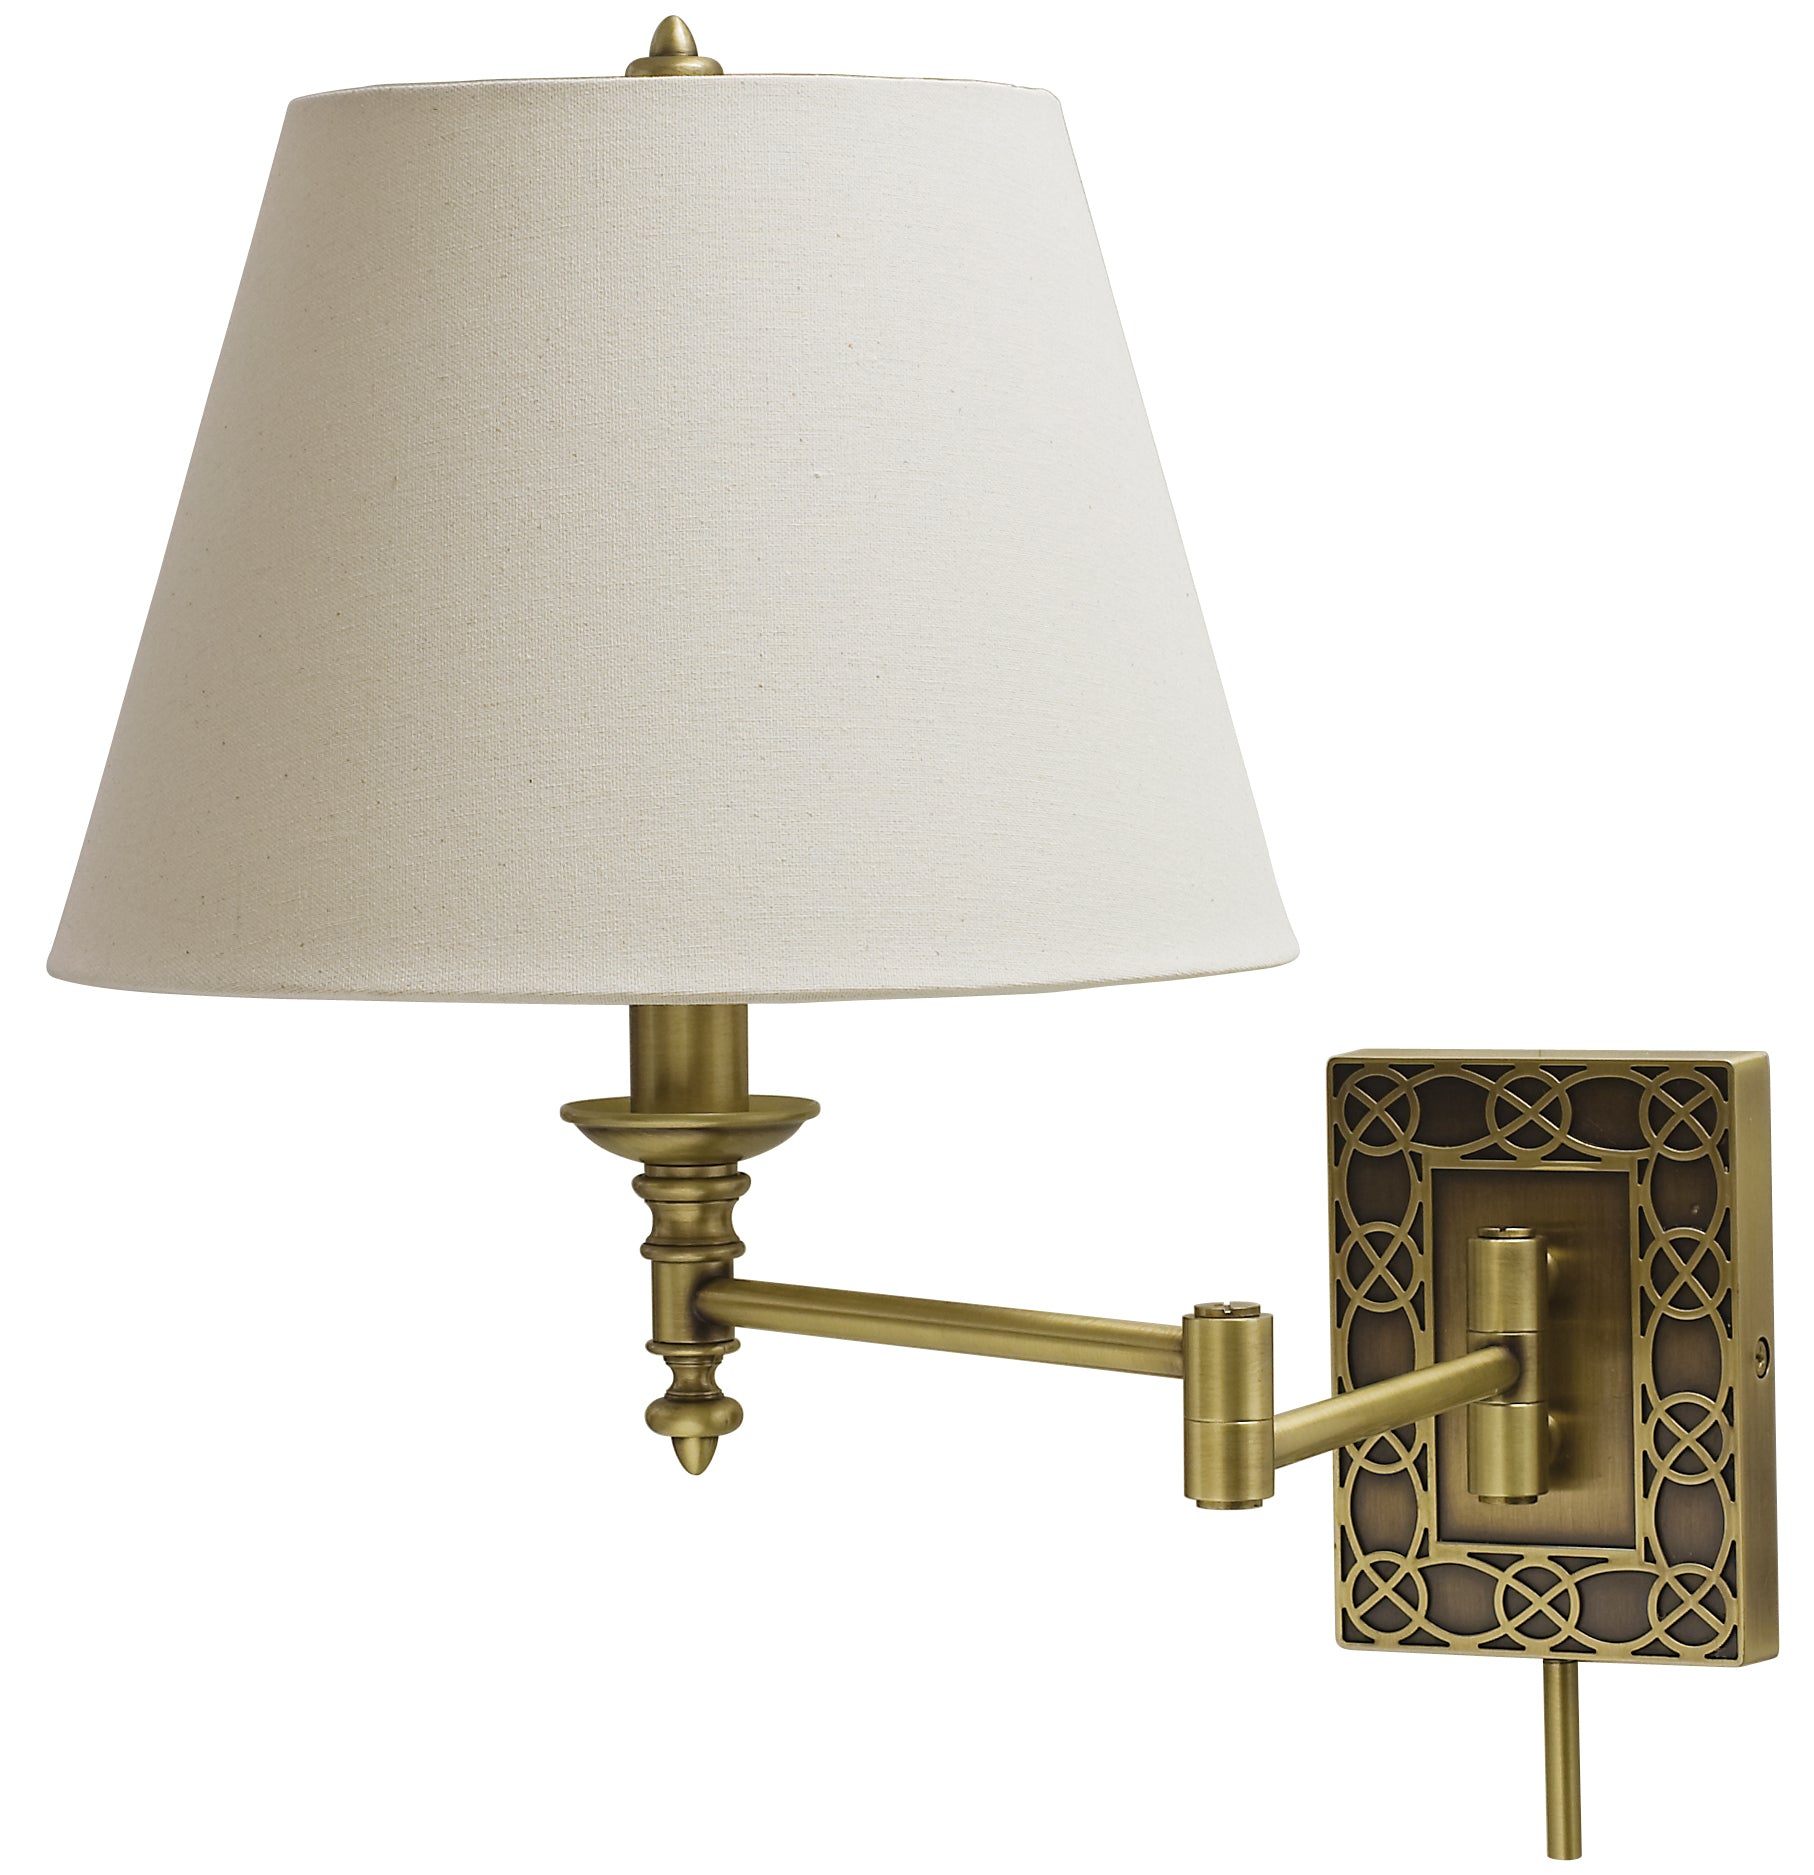 House of Troy Wall Swing Arm Lamp Antique Brass WS763-AB